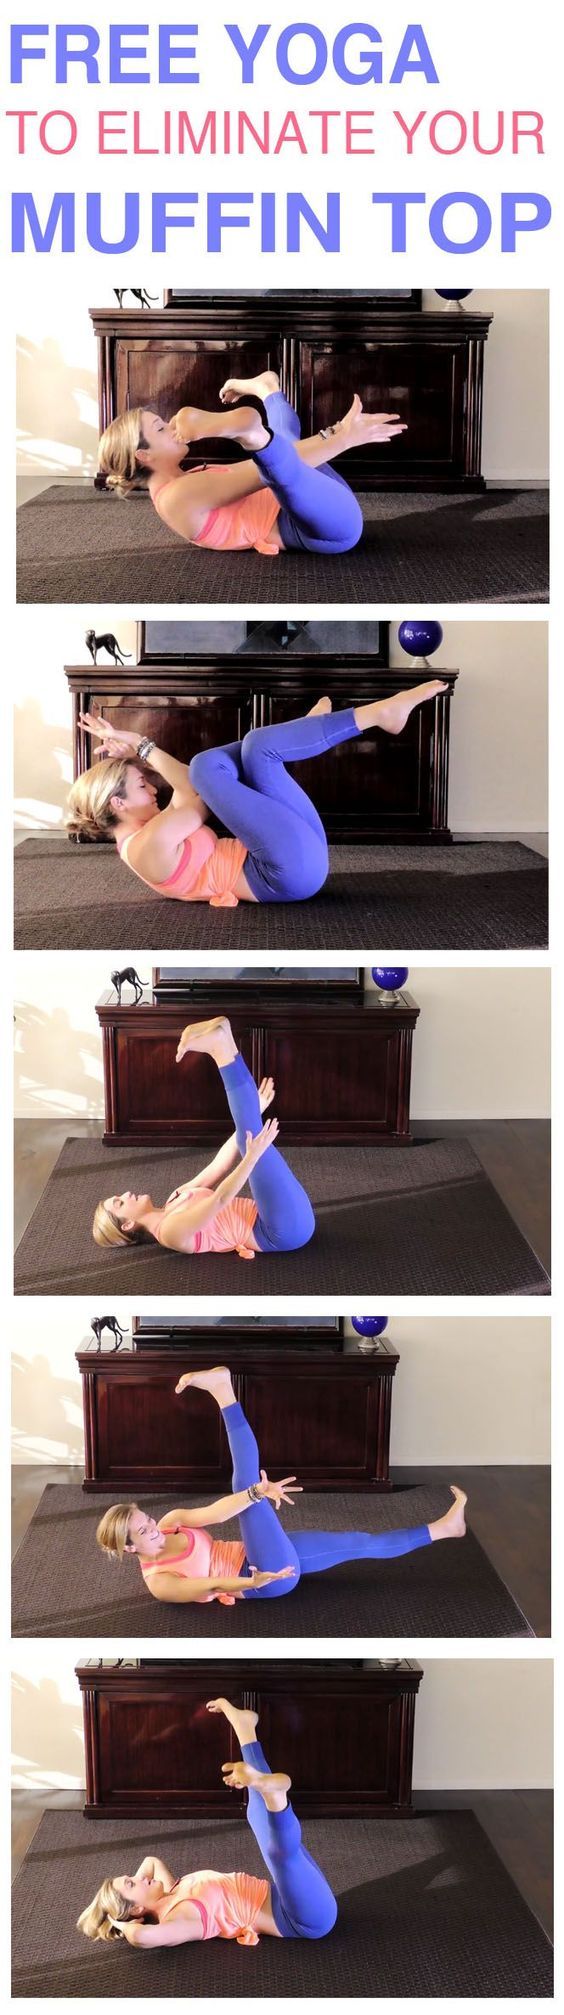 Yoga to Eliminate Your Muffin Top.